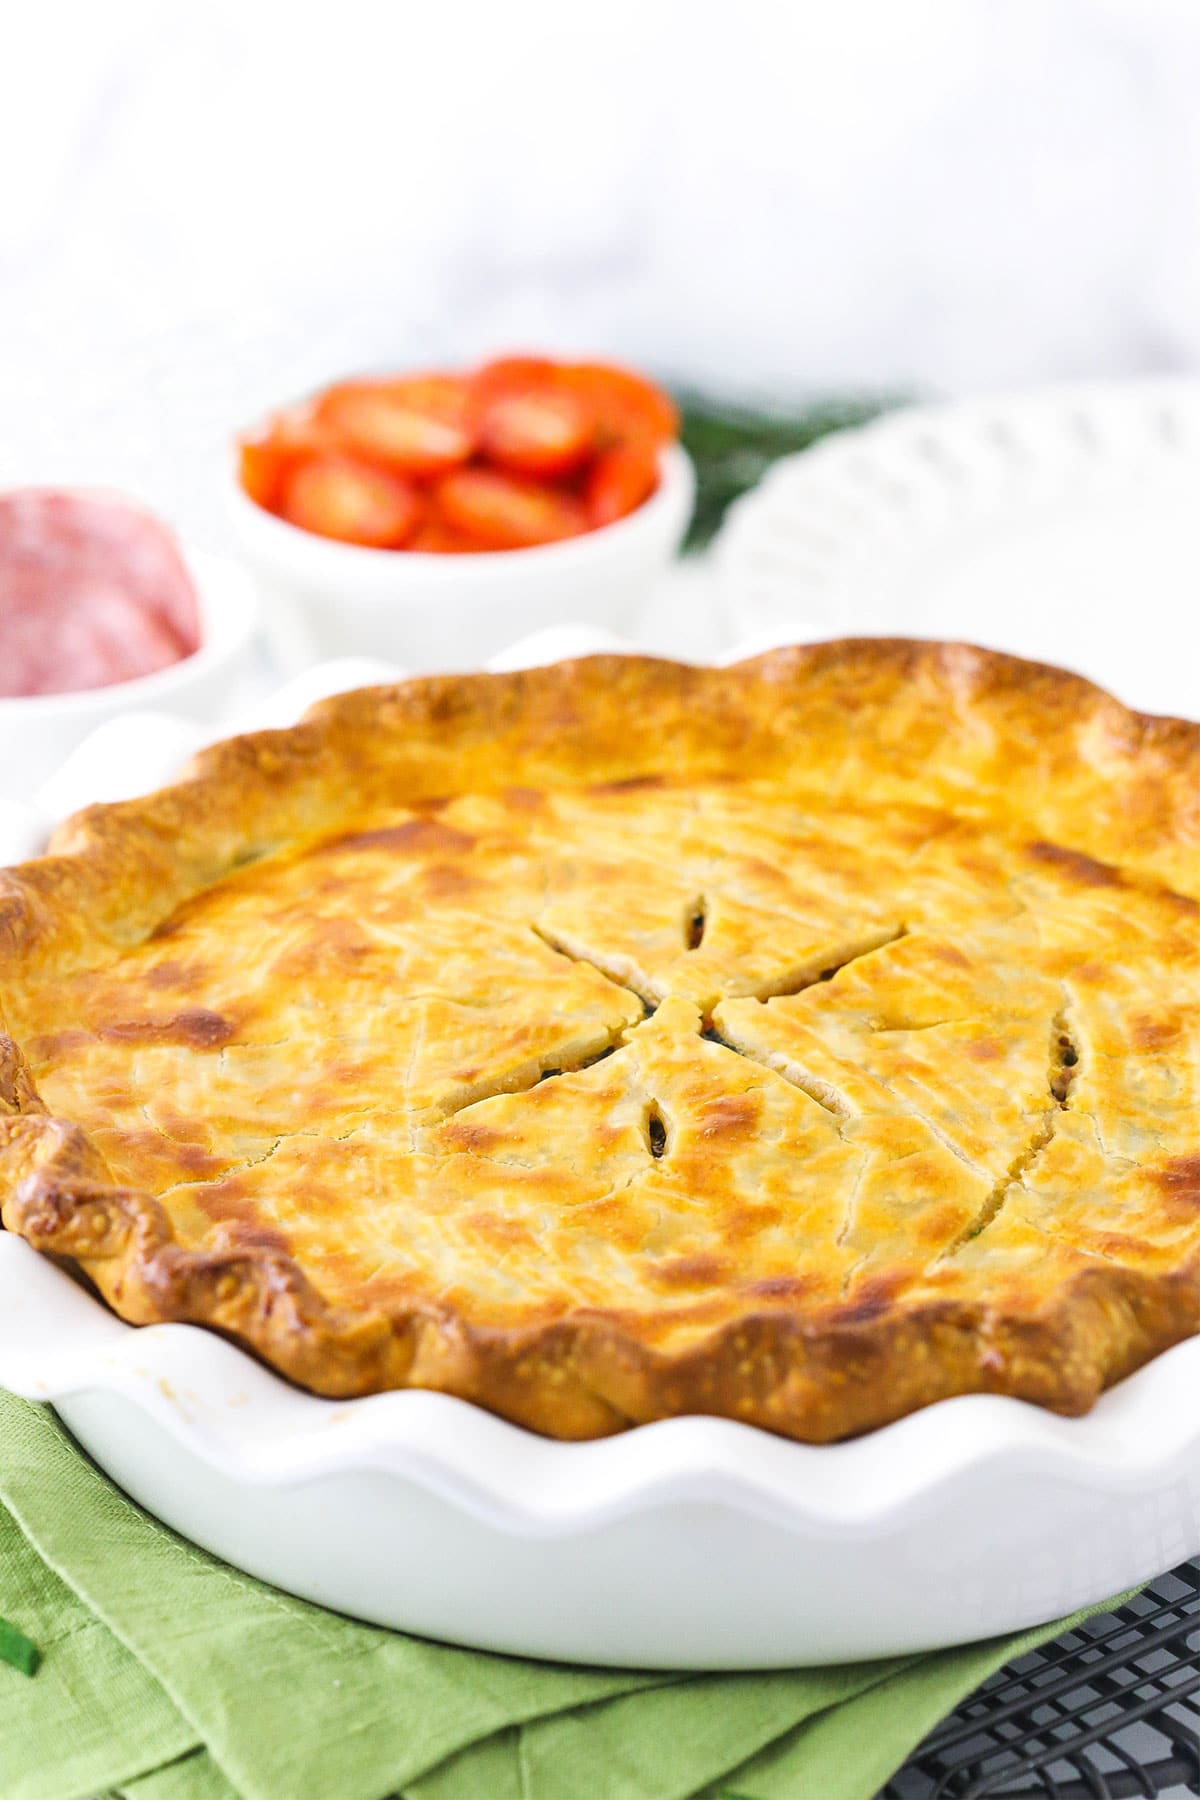 A homemade meat pie with pie crust